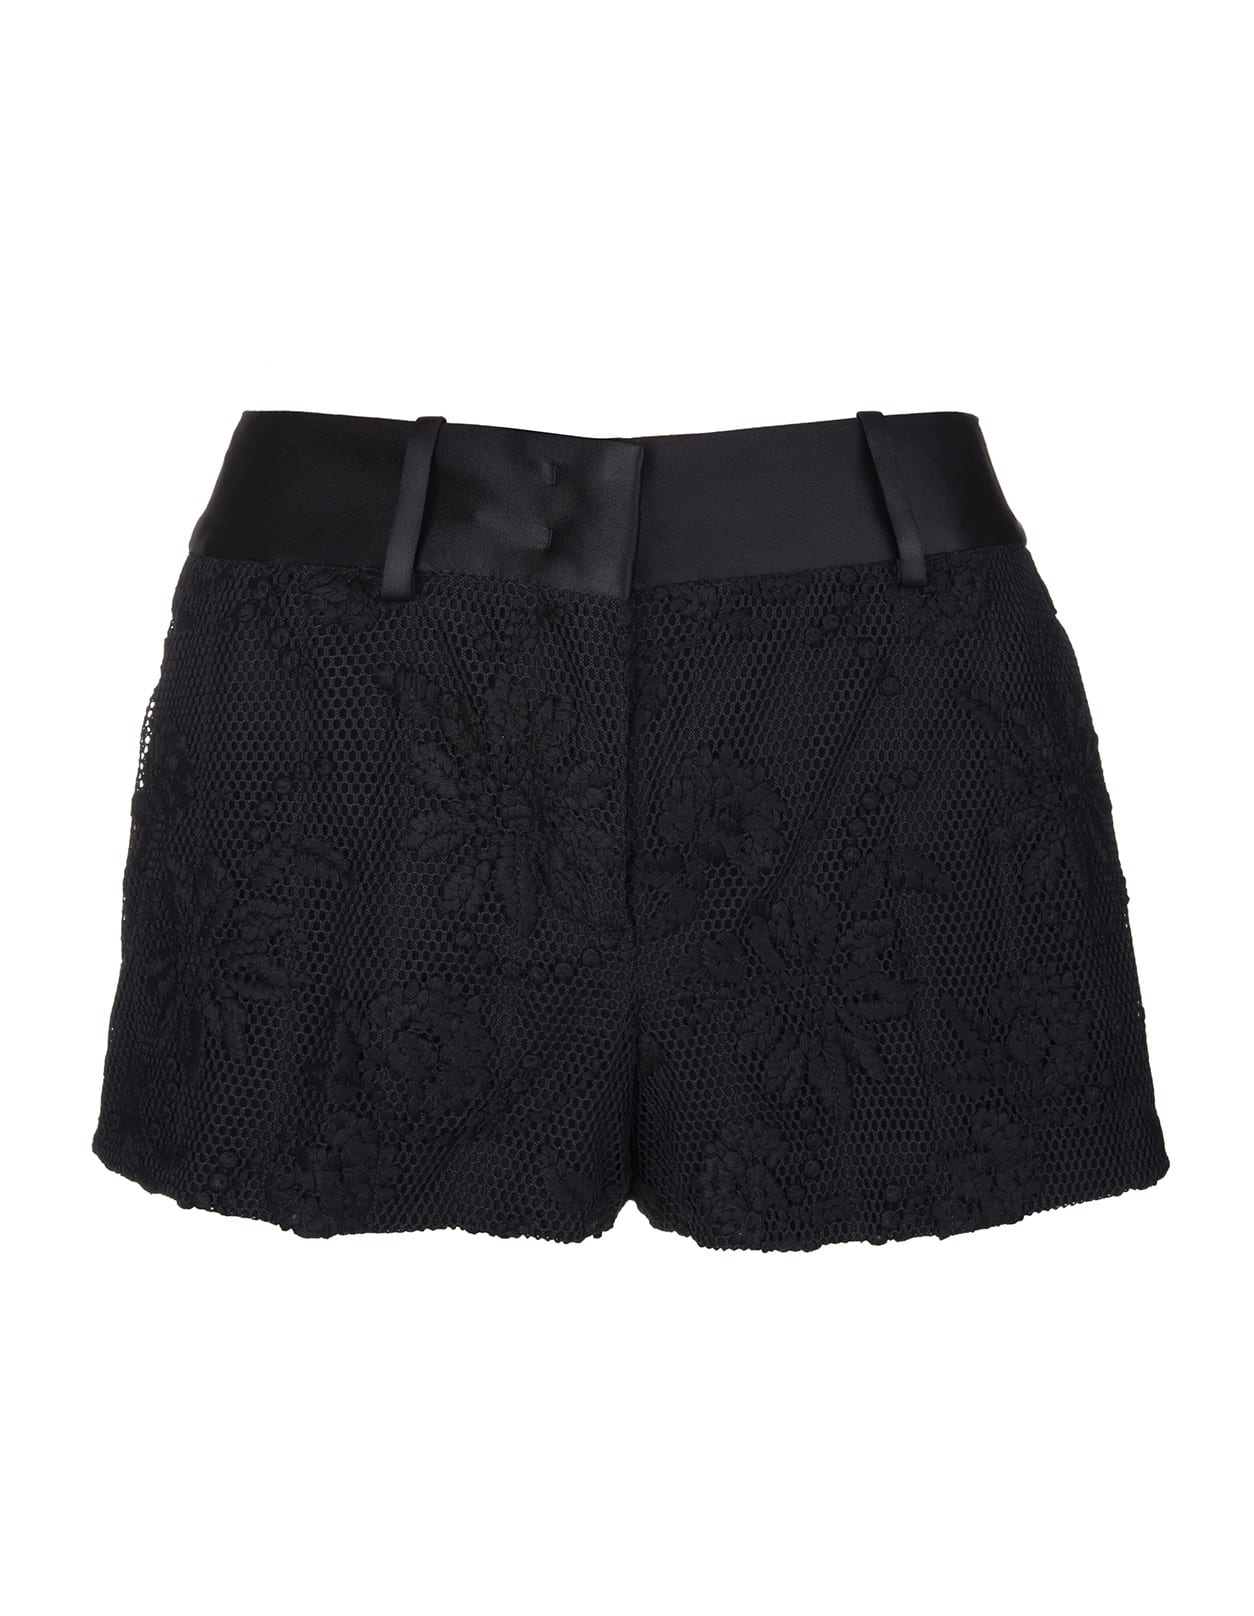 Ermanno Scervino Black Mesh And Lace Shorts